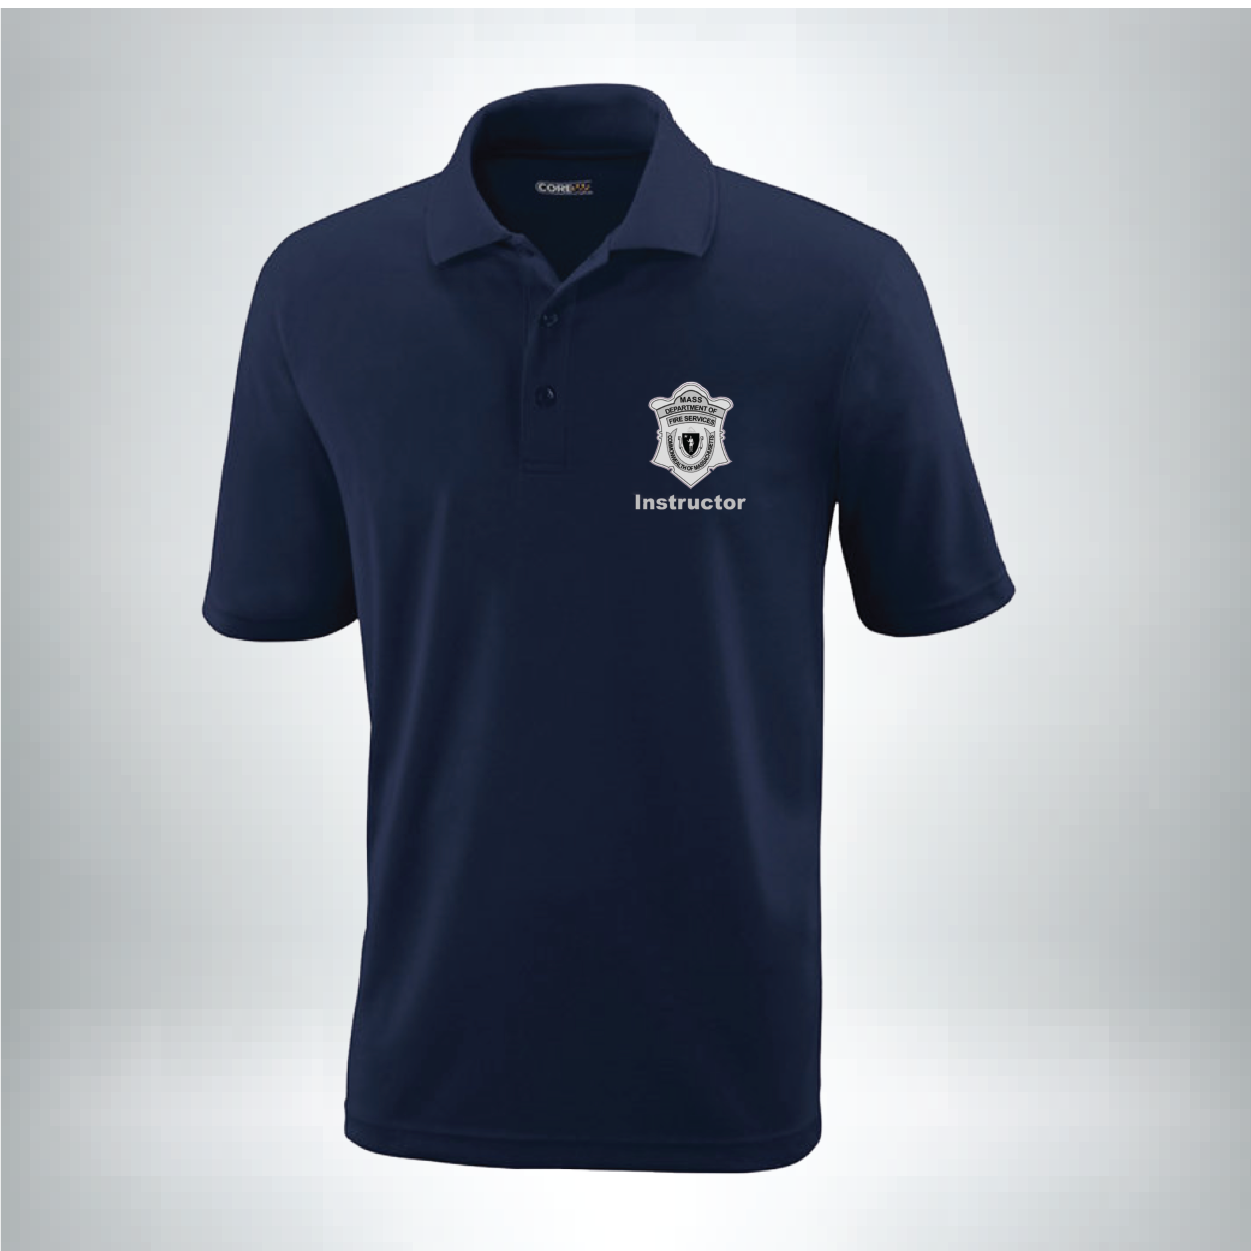 DFS Instructor Polo